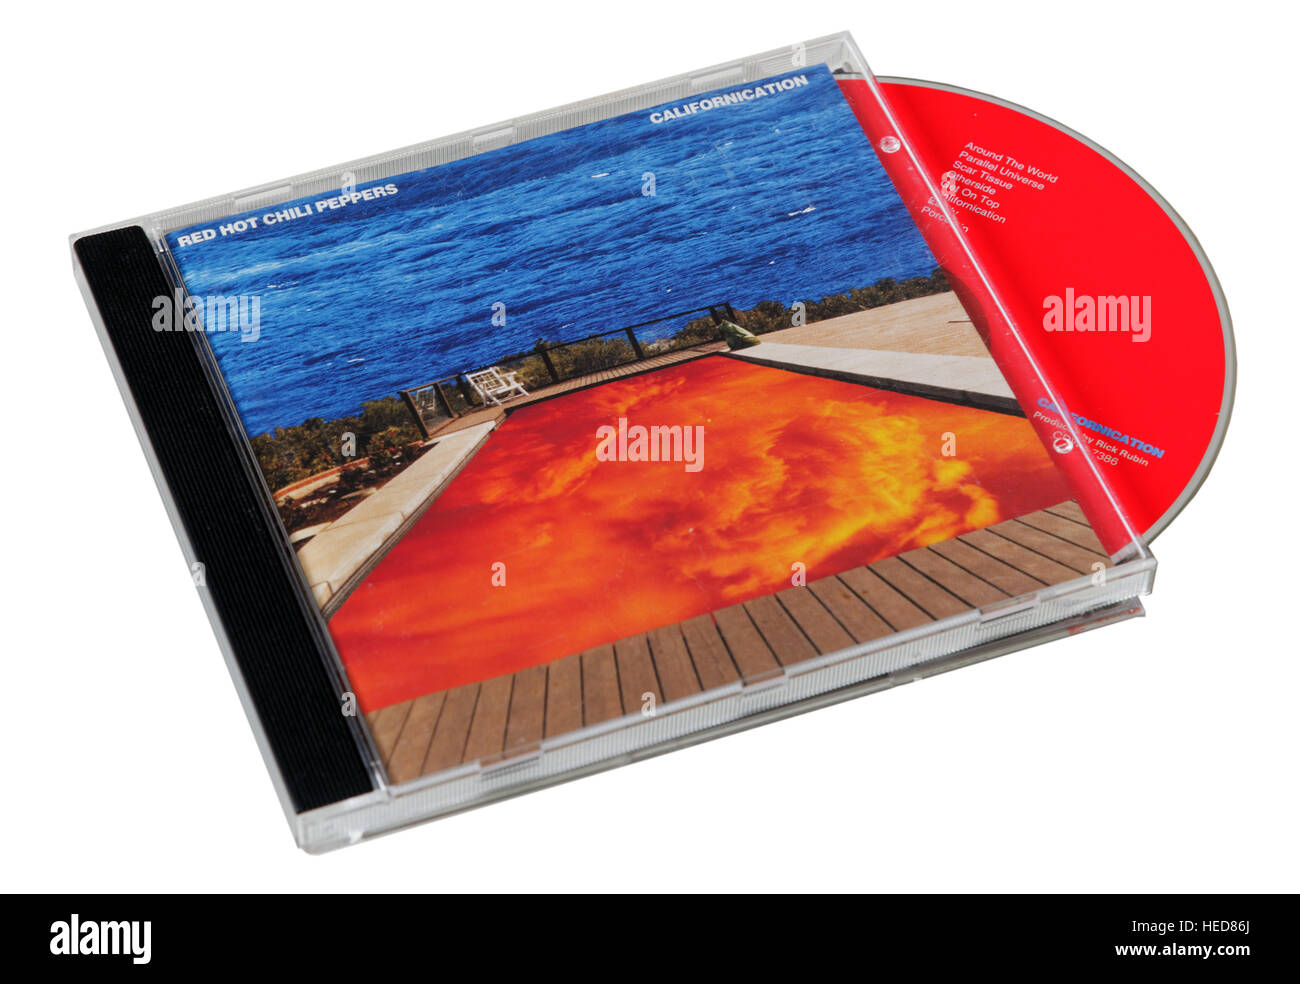 Red Hot Chili Peppers Californication CD Foto Stock